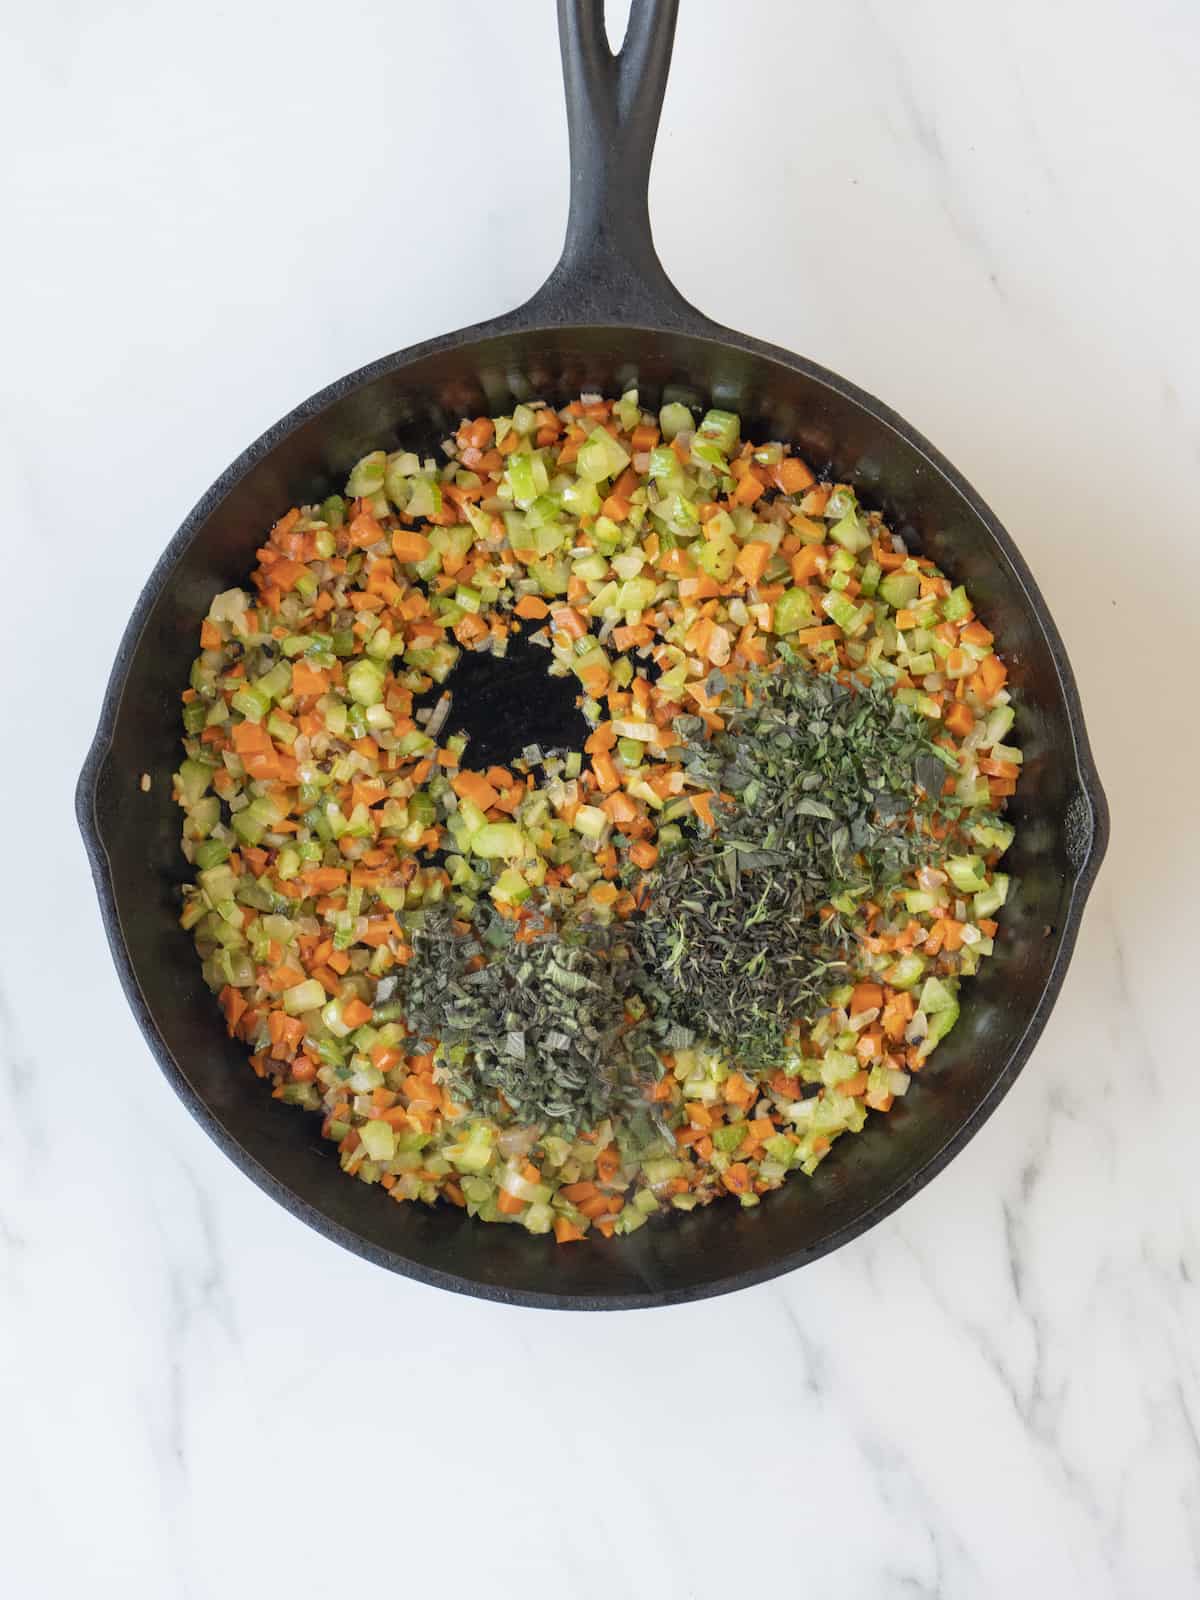 A skillet with chopped vegetables being cooked and topped with freshly chopped sage, thyme and oregano.